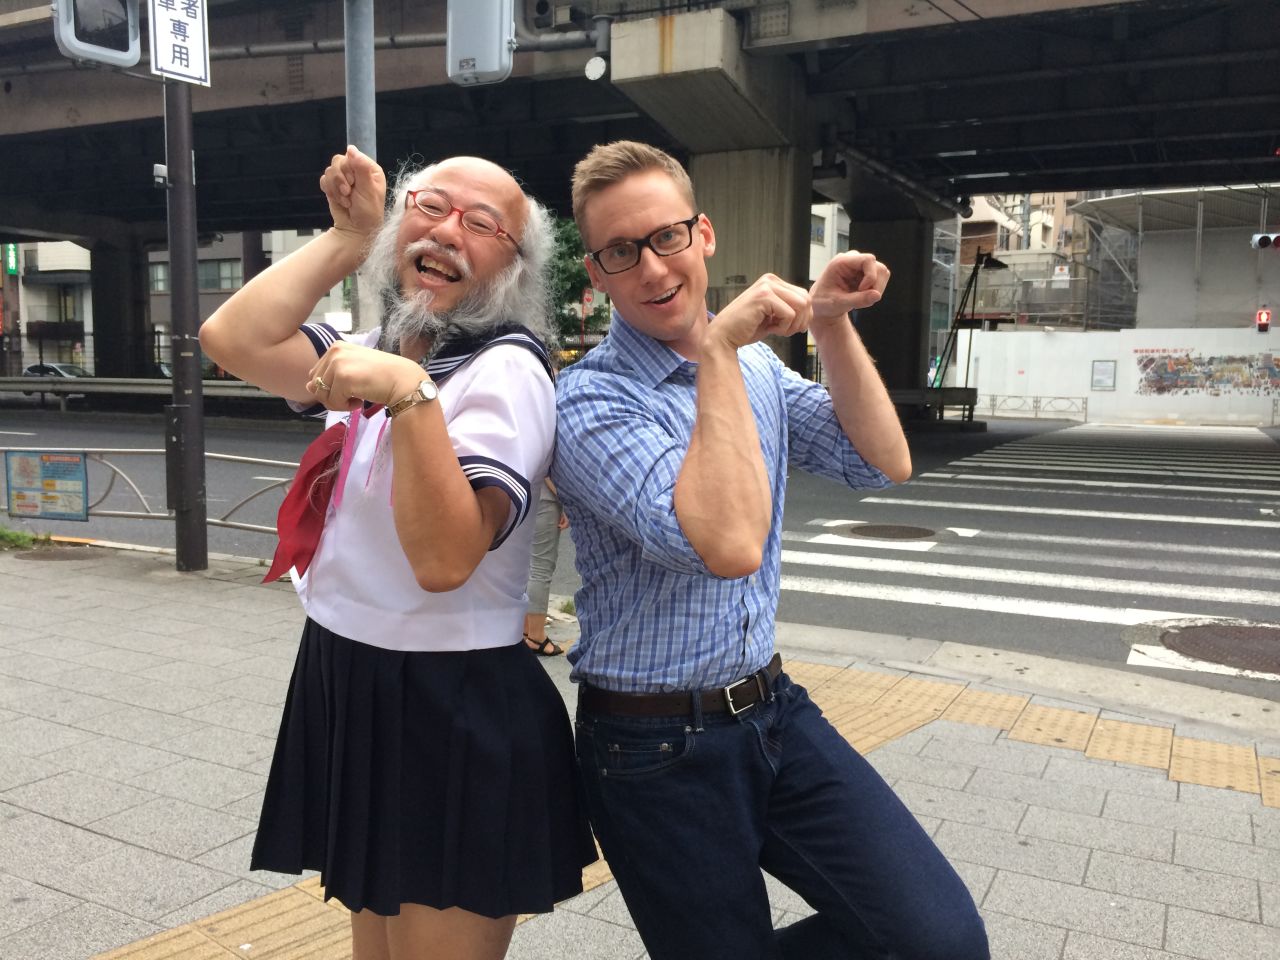 CNN correspondent Will Ripley makes an unsuccessful attempt to mimic Kobayashi's signature pose after interviewing him.  